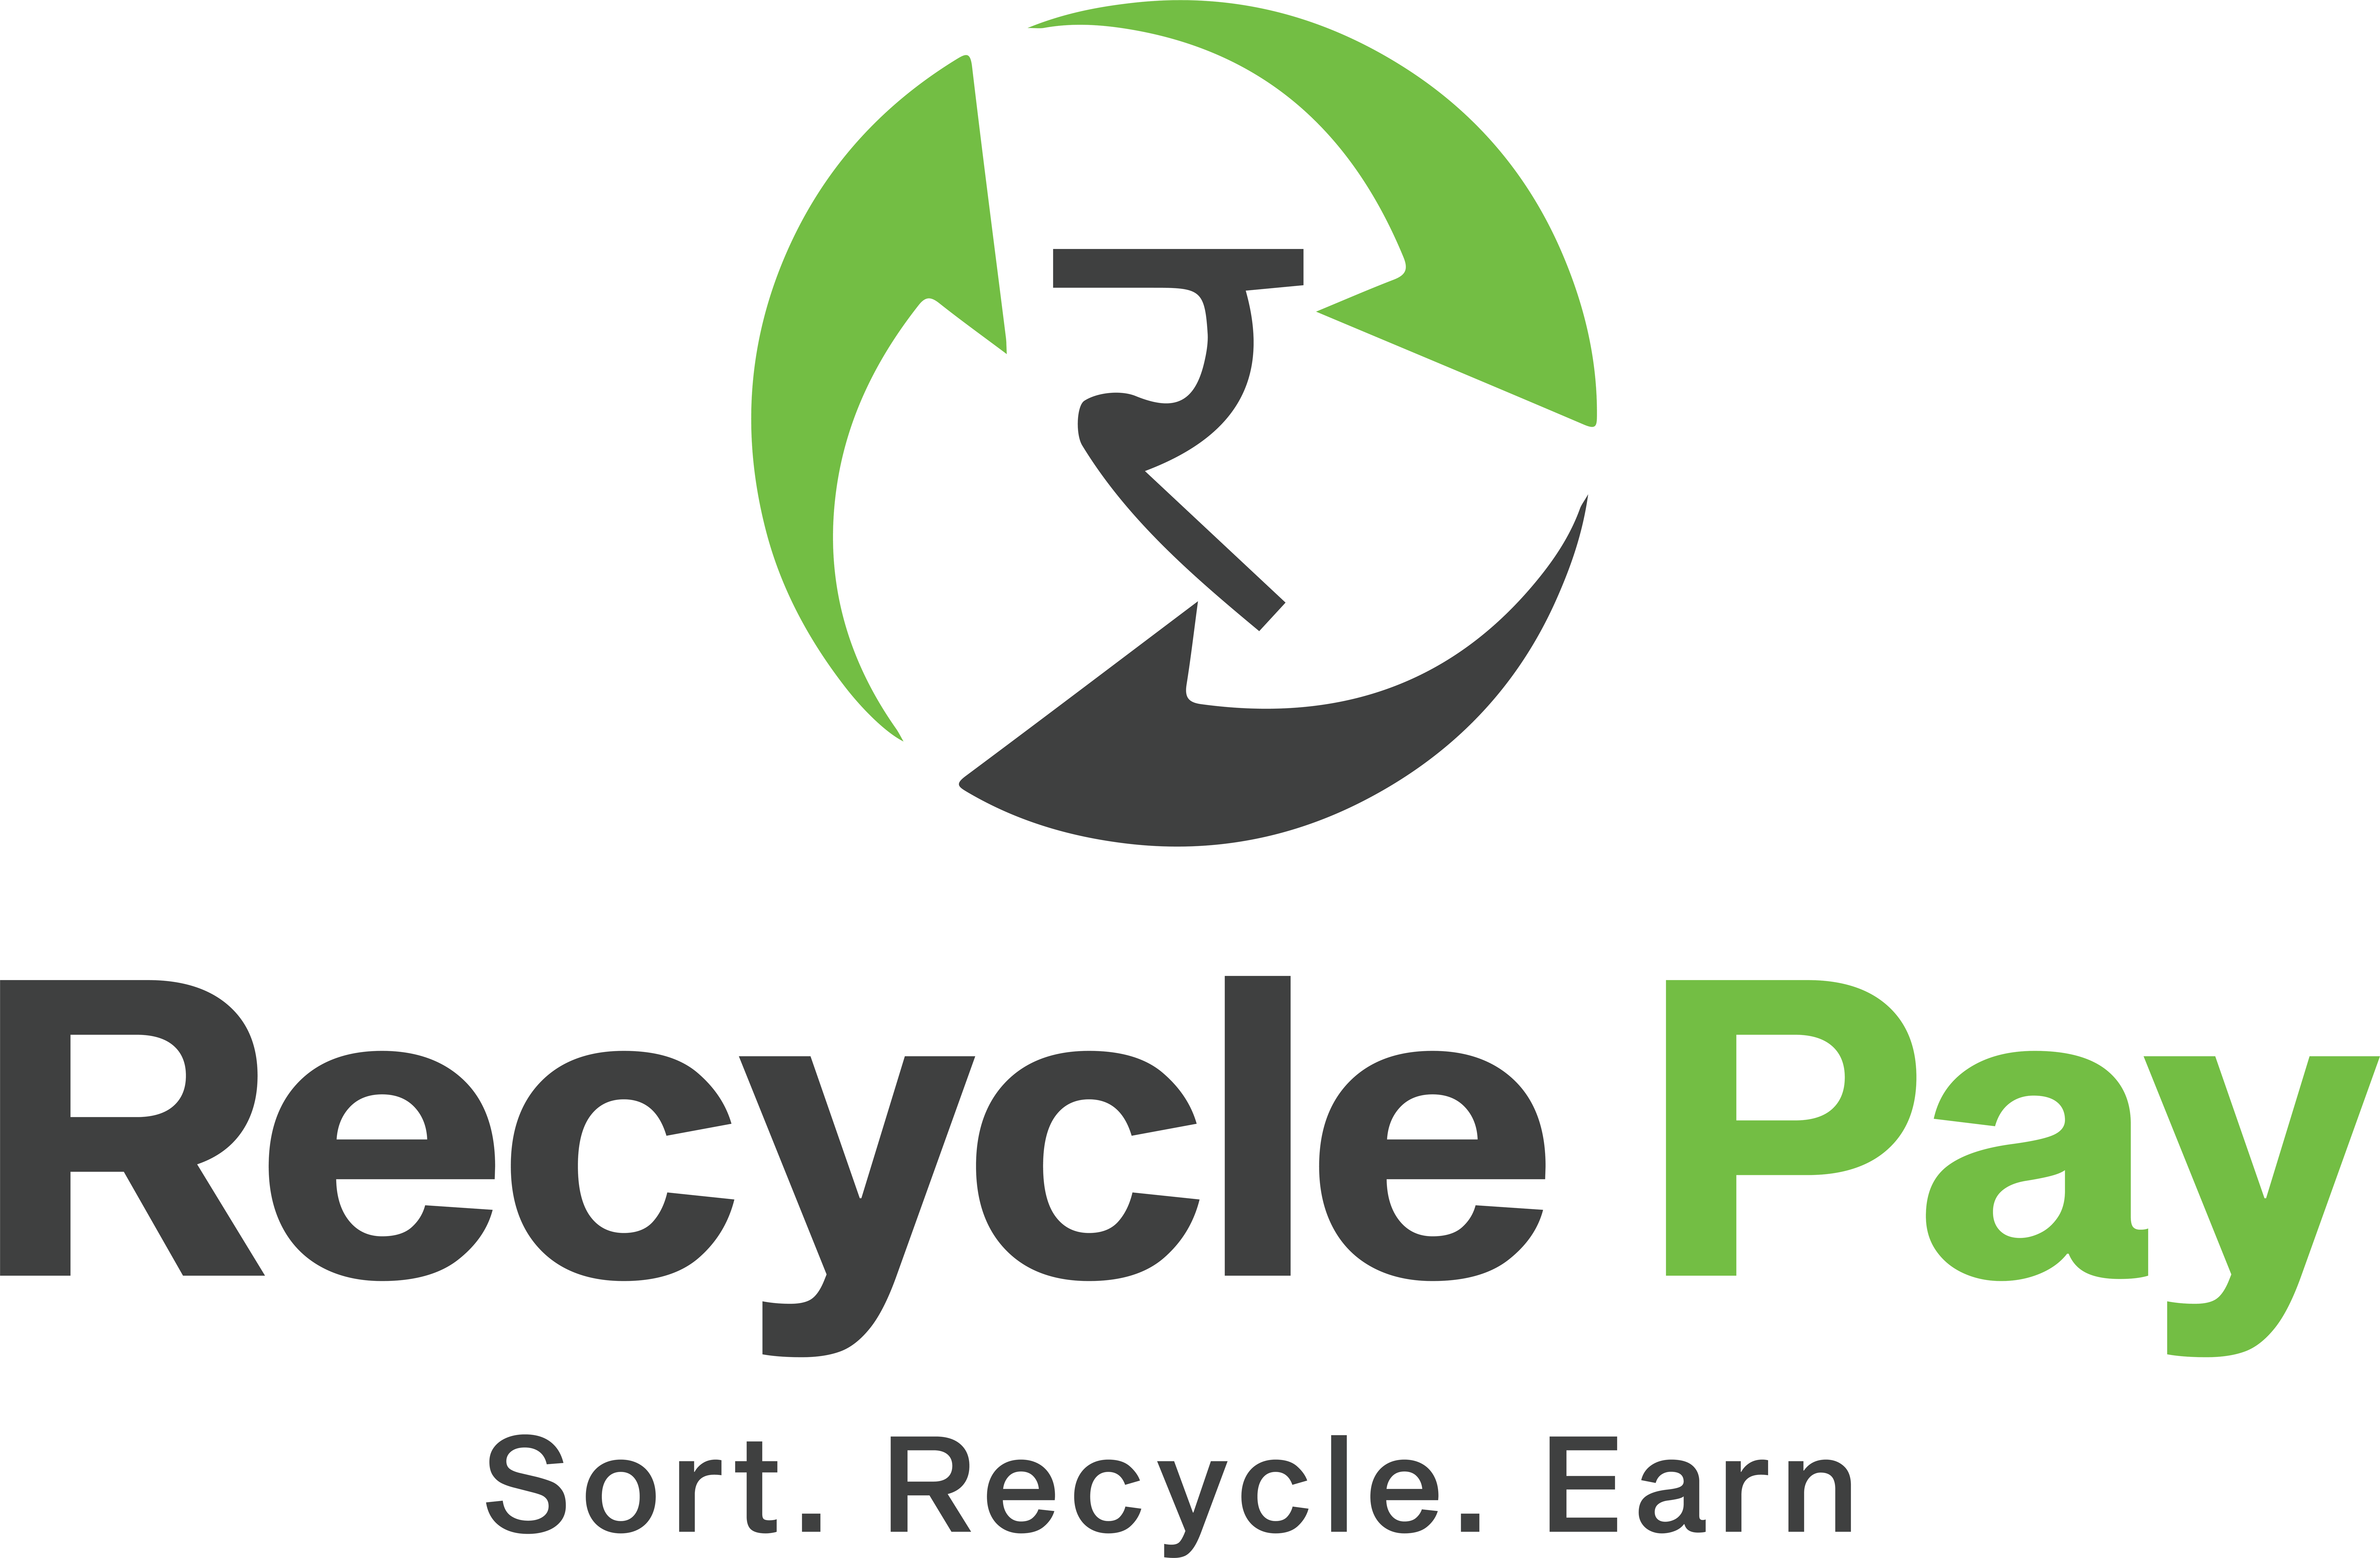 RECYCLE-PAY